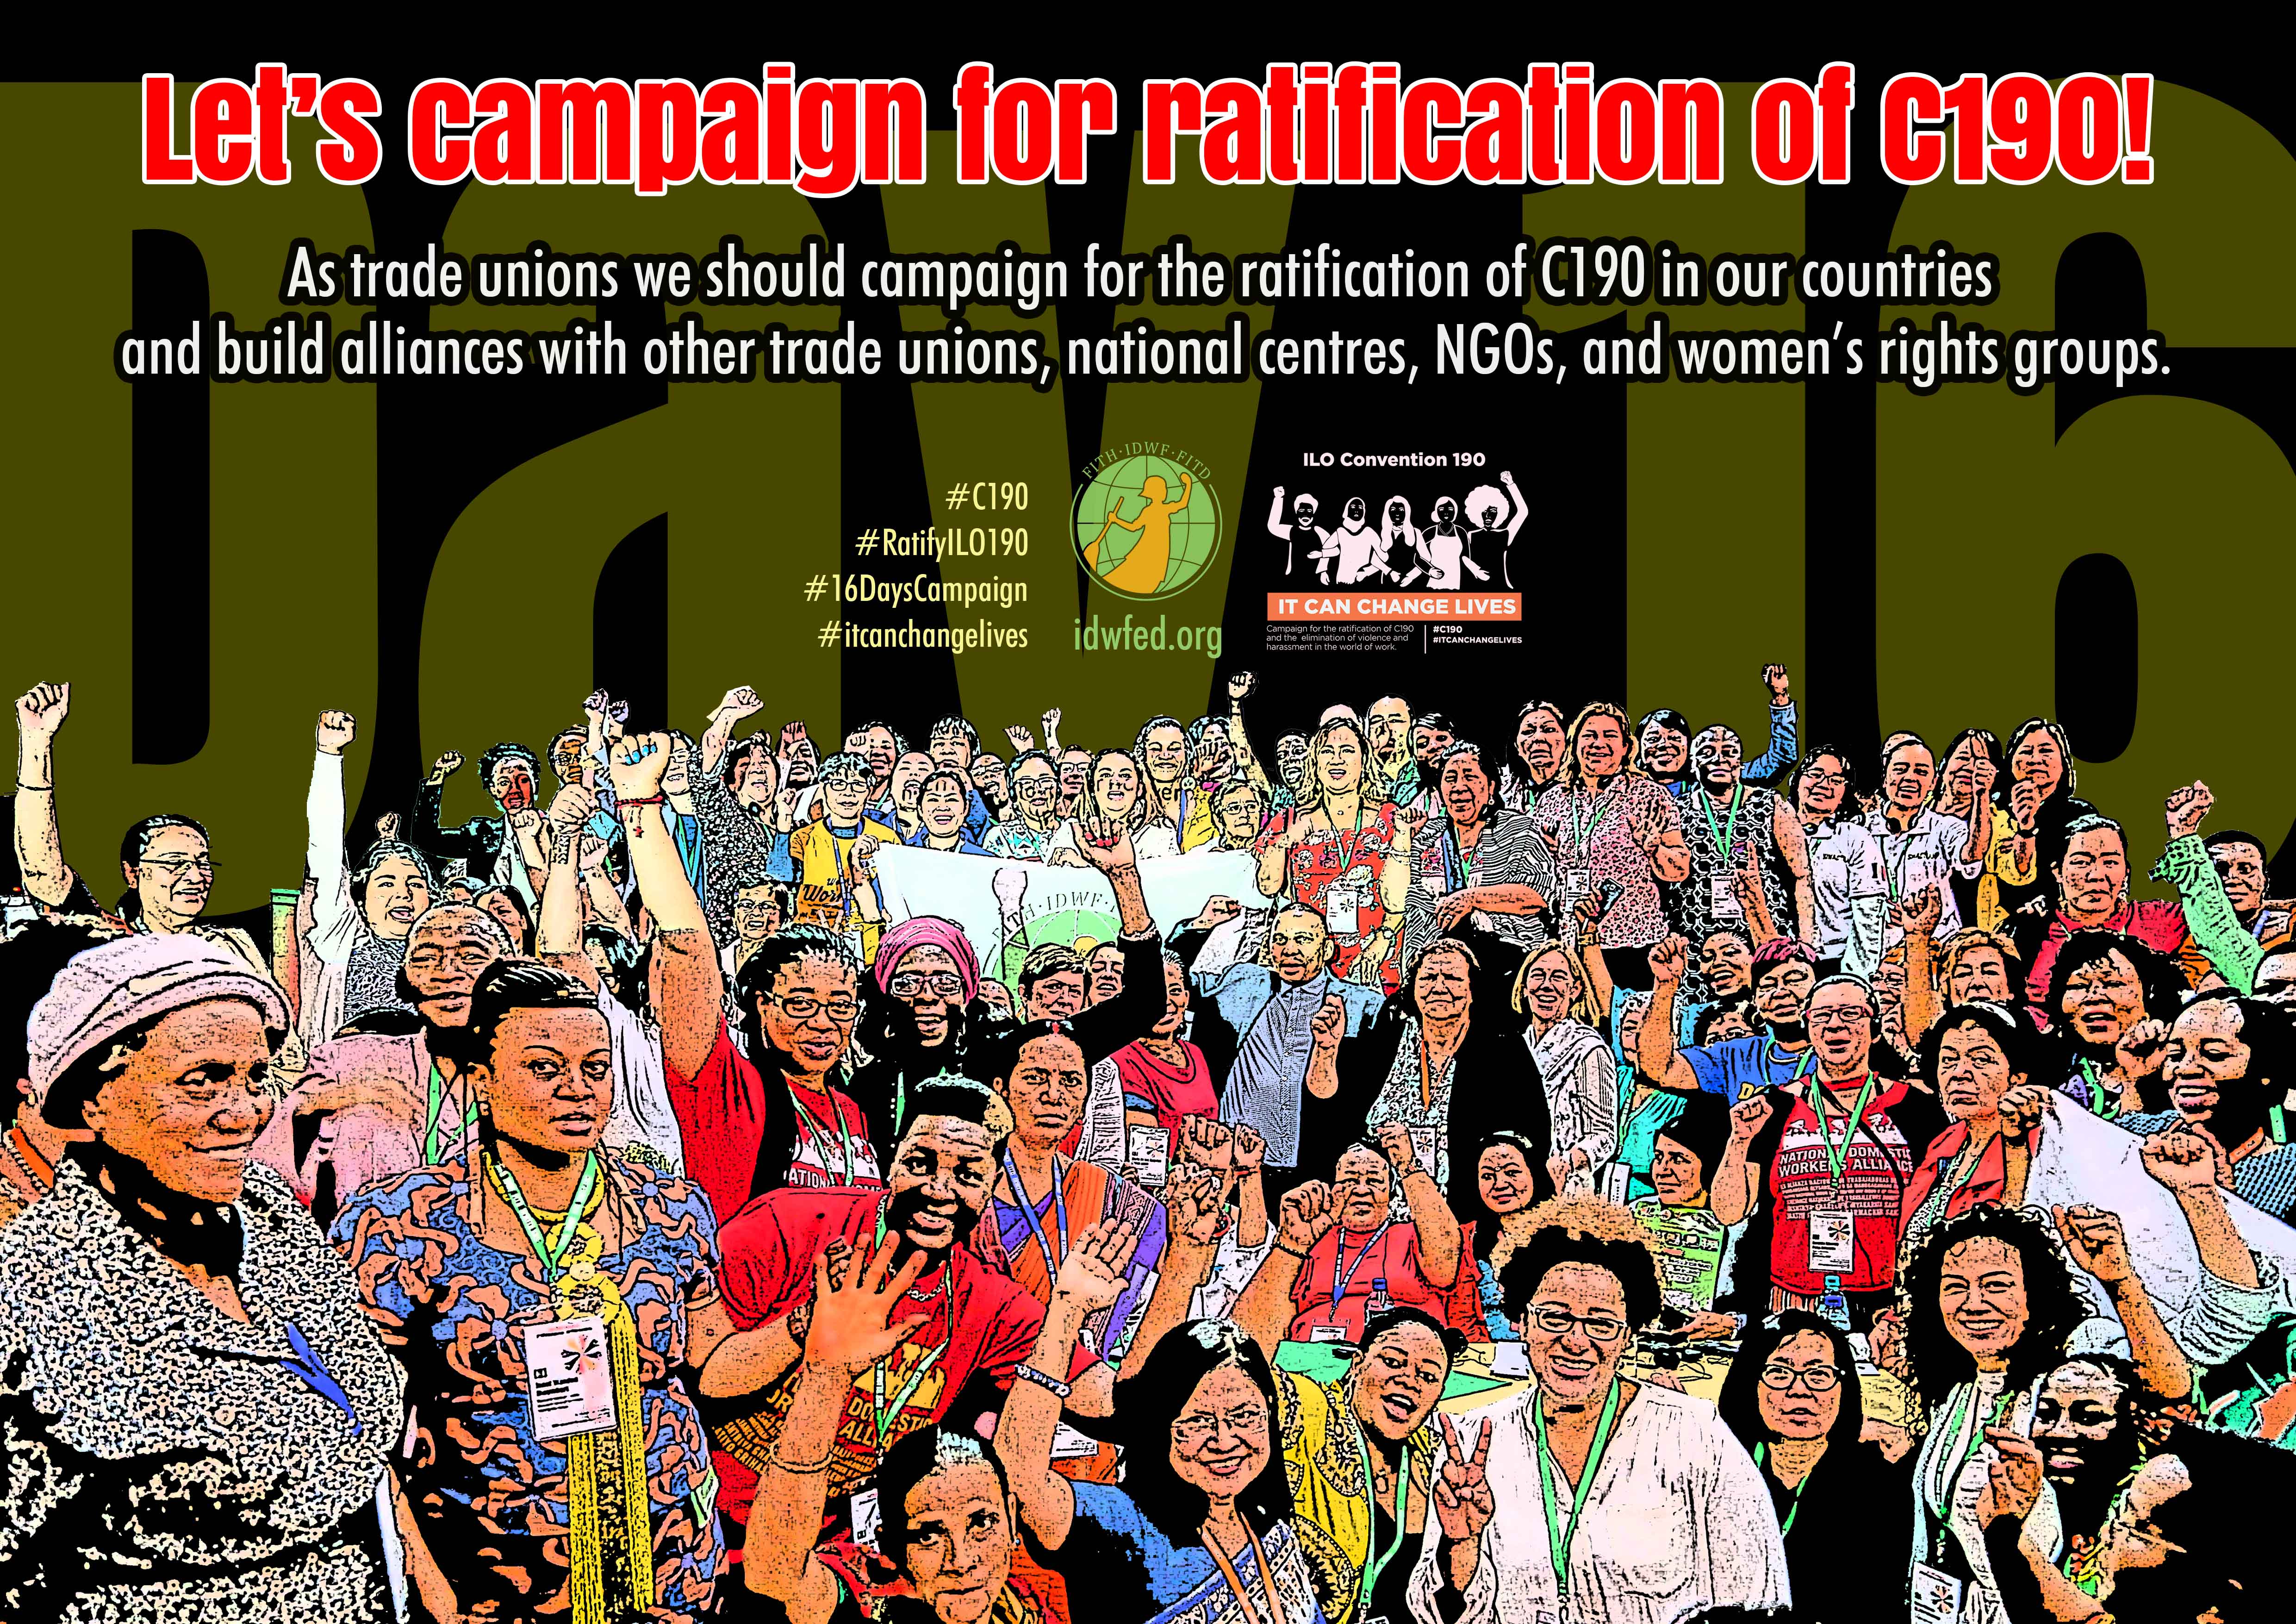 16. Let’s campaign for ratification of C190!